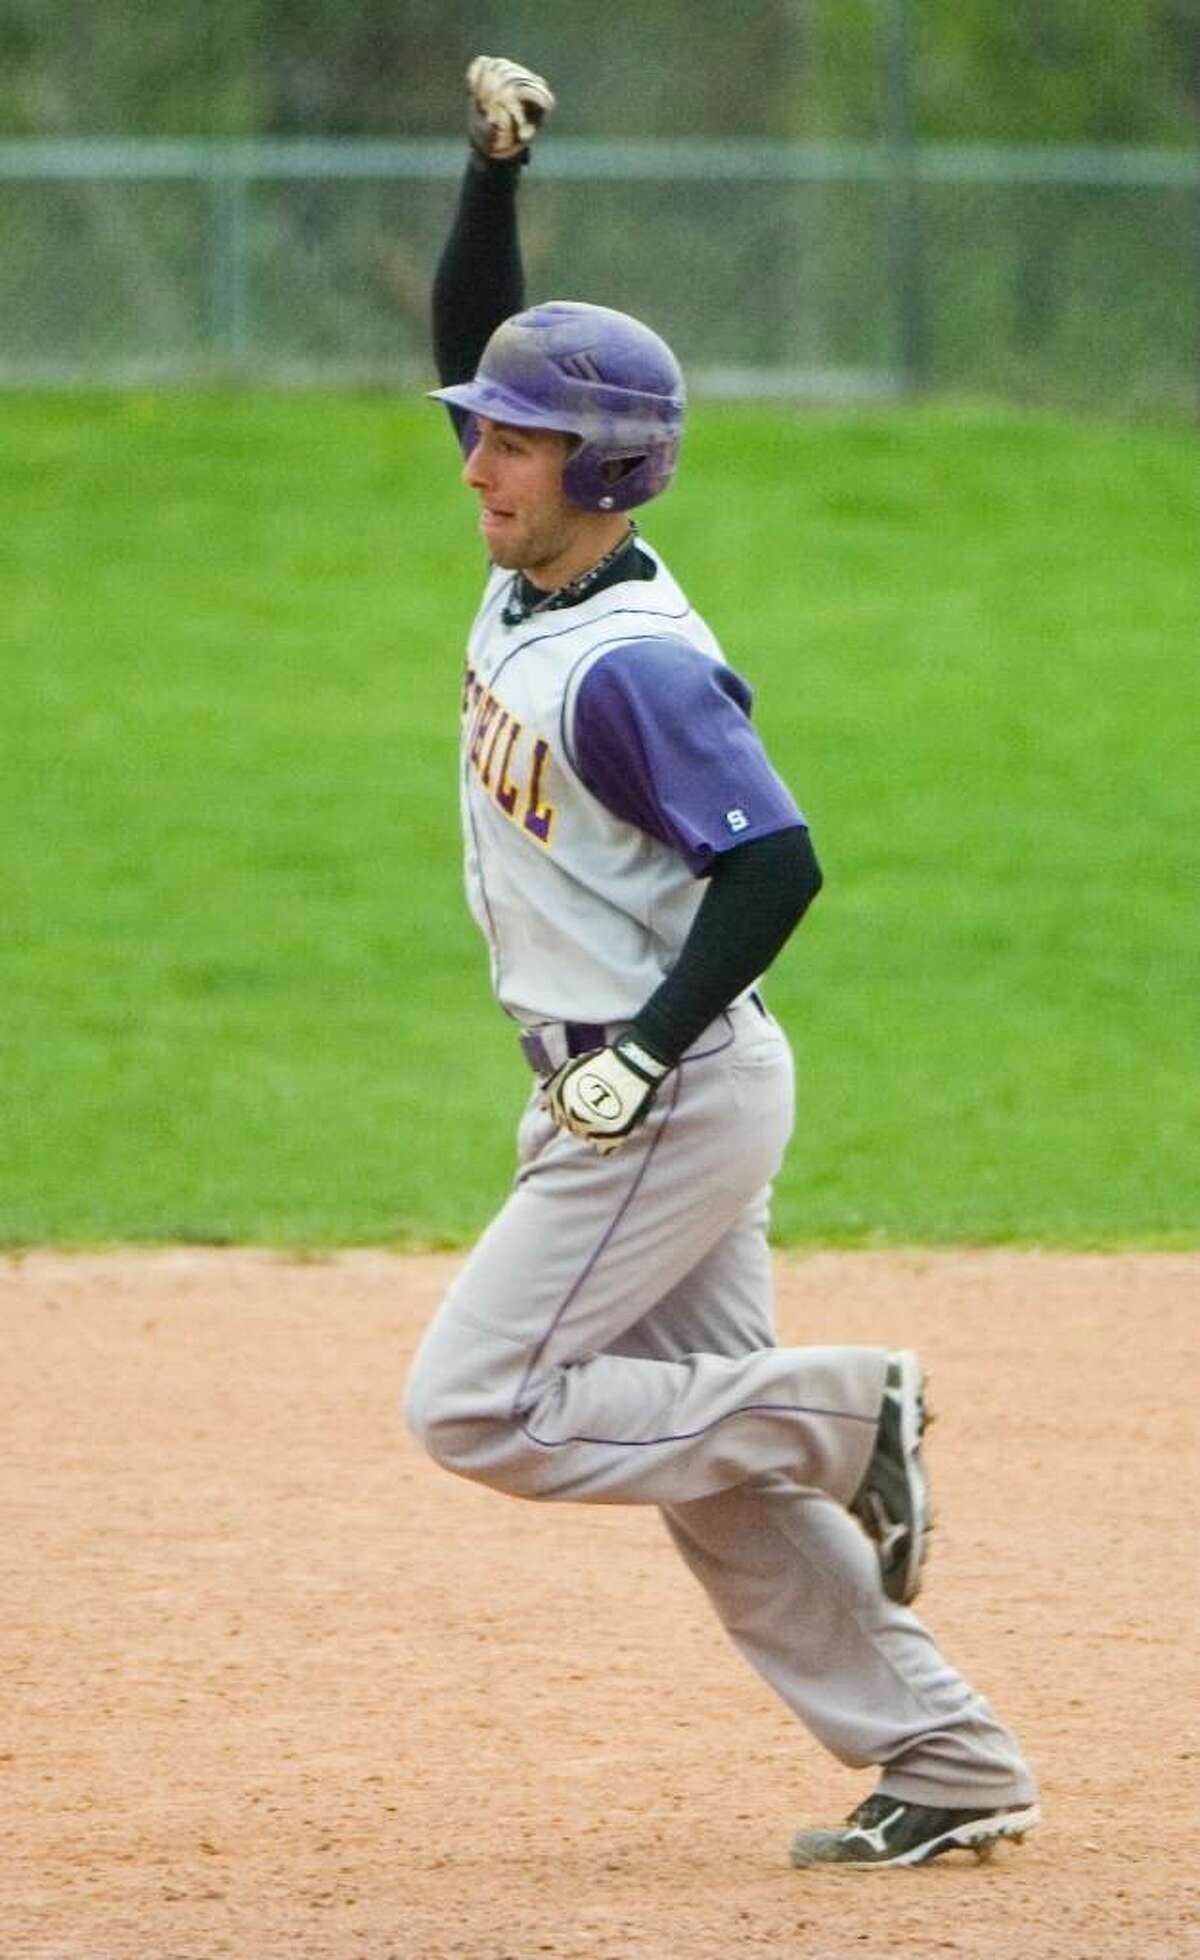 Westhill High School's Tyler Rich pumps his fist in the air in celebration after hitting a grand slam during a game against Staples High School in Stamford, Conn on April 16, 2010.